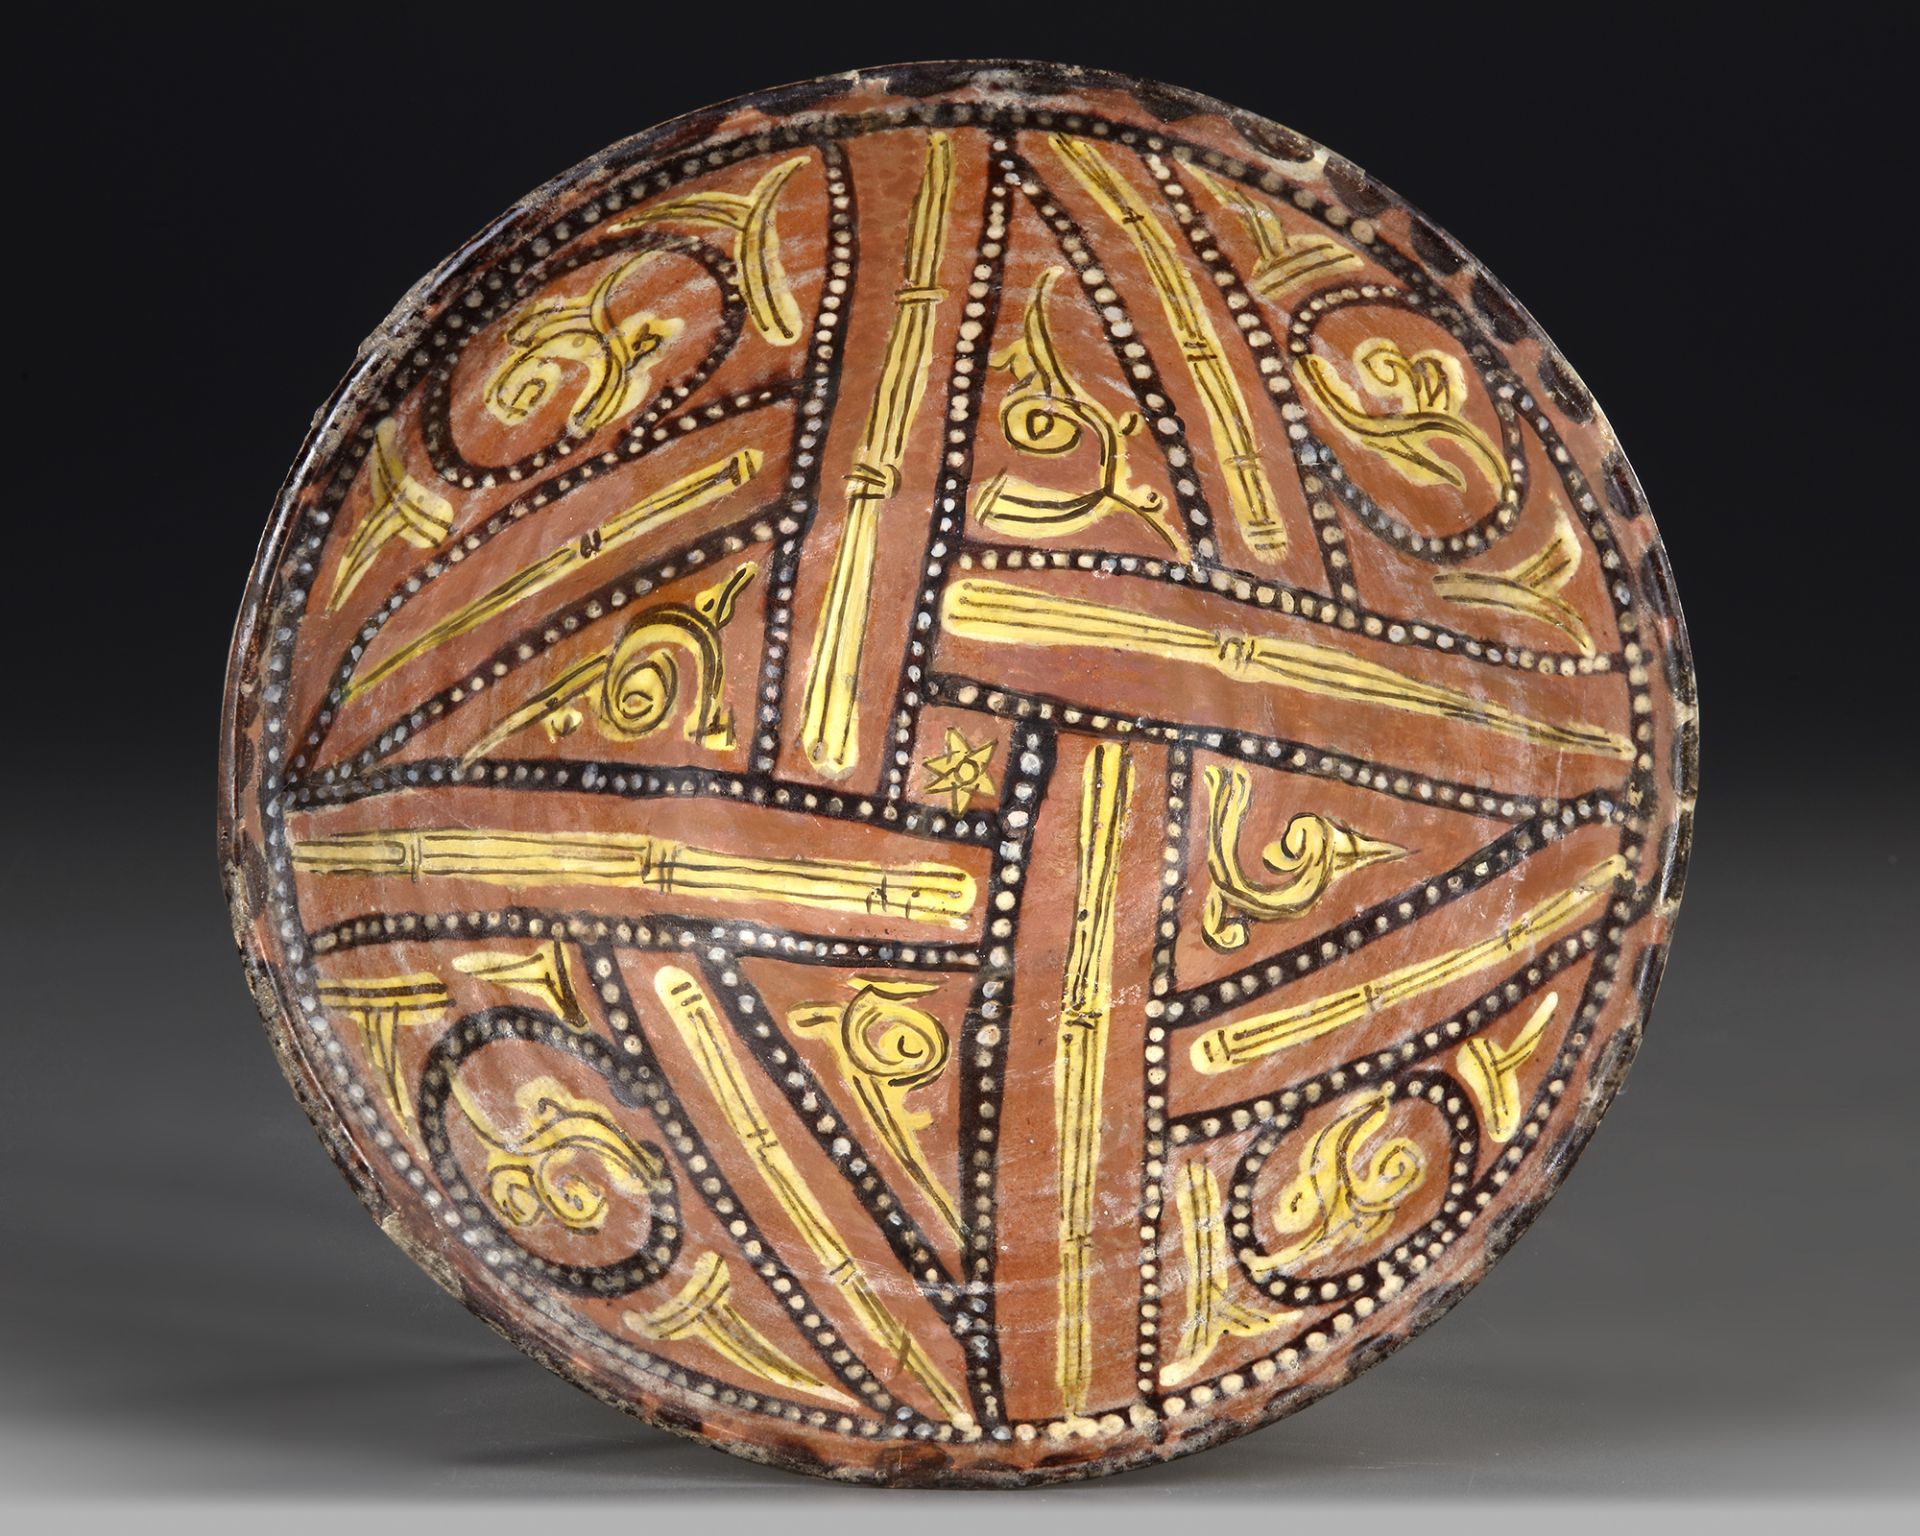 A NISHAPUR CONICAL POTTERY BOWL, PERSIA, 10TH CENTURY - Image 4 of 5